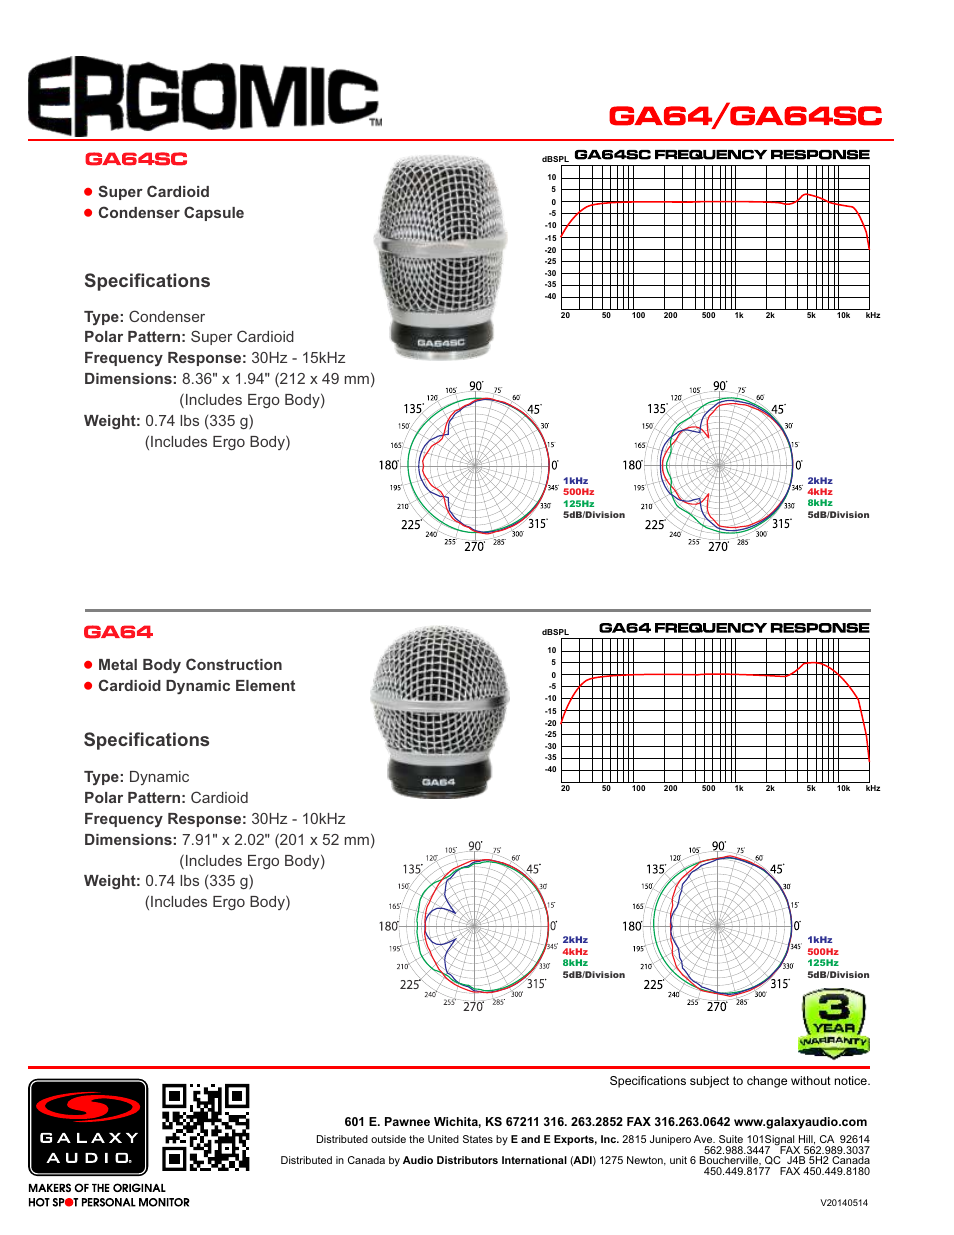 Specifications, Super cardioid condenser capsule, Metal body construction cardioid dynamic element | Galaxy Audio GA64 / GA64SC User Manual | Page 2 / 2